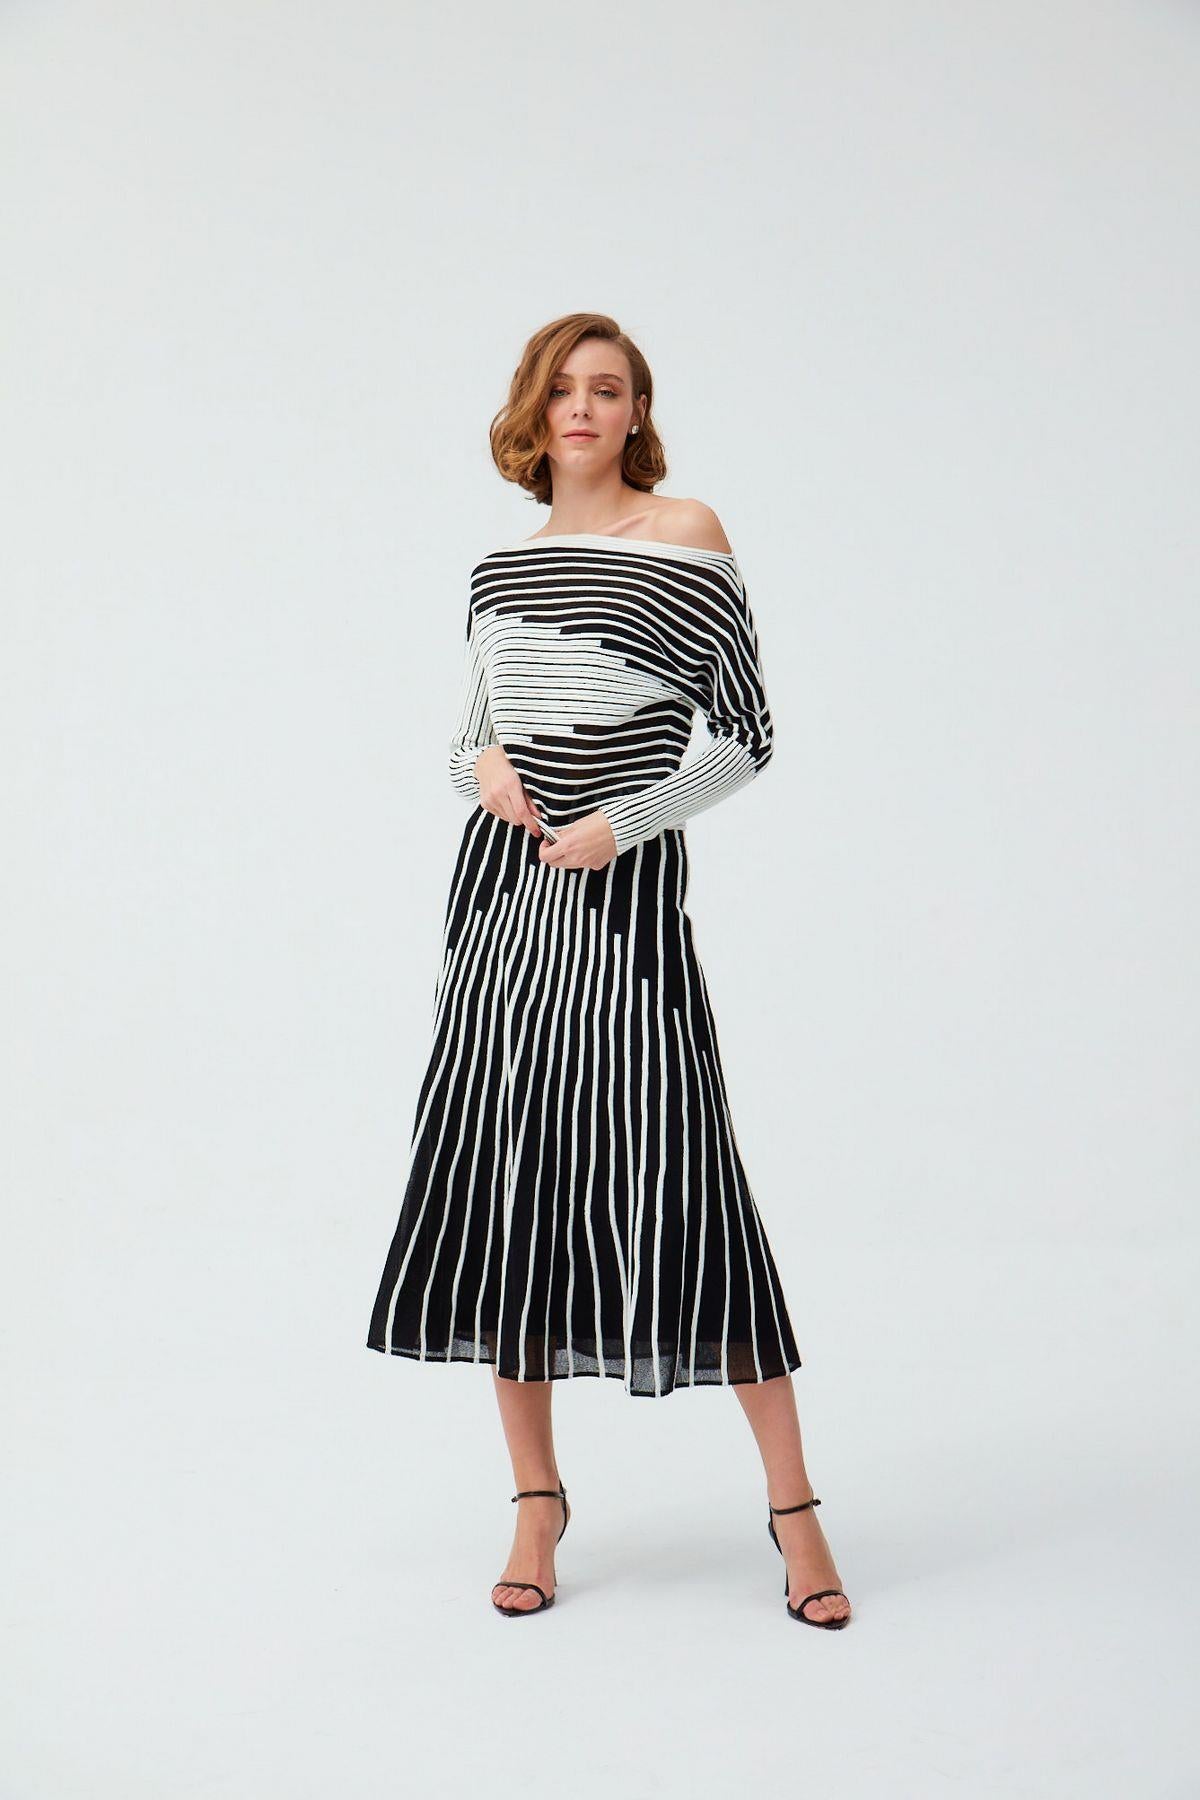 Black and White Striped Boat Neck  Blouse